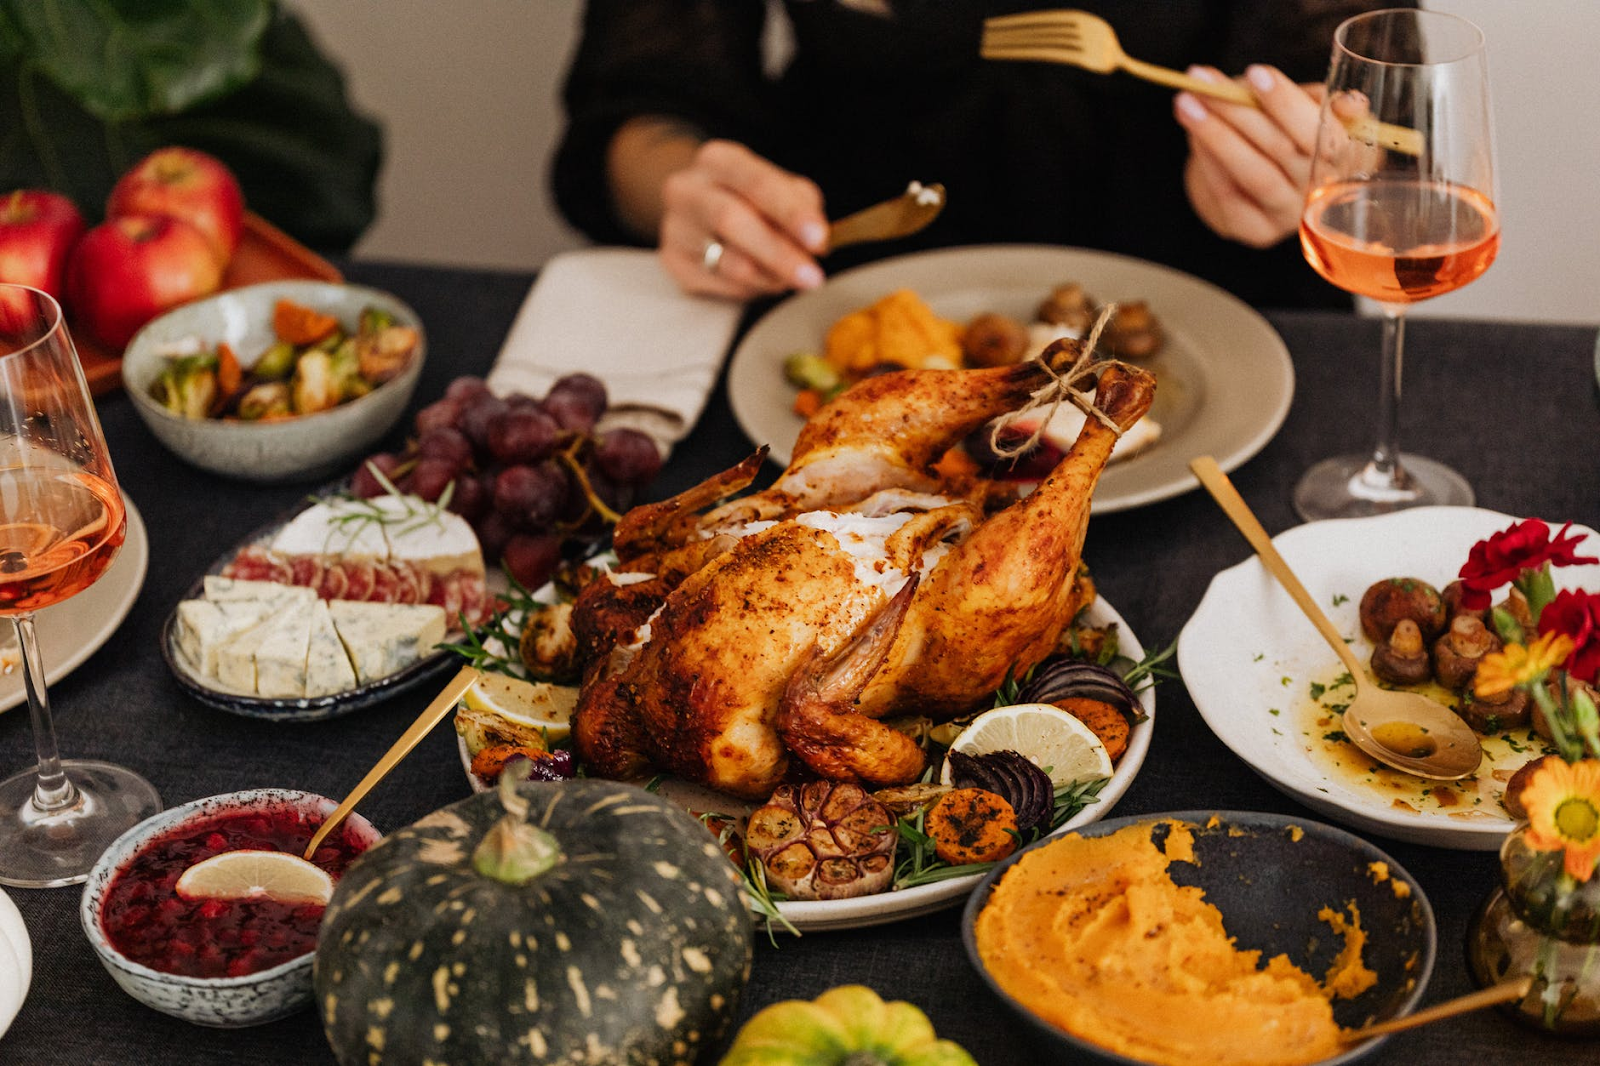 The holidays are a joyous time filled with family, friends, and plenty of good food. While everyone enjoys the celebrations during this time of year, many people also fear the dreaded weight gain accompanying hearty holiday meals and sugary treats.